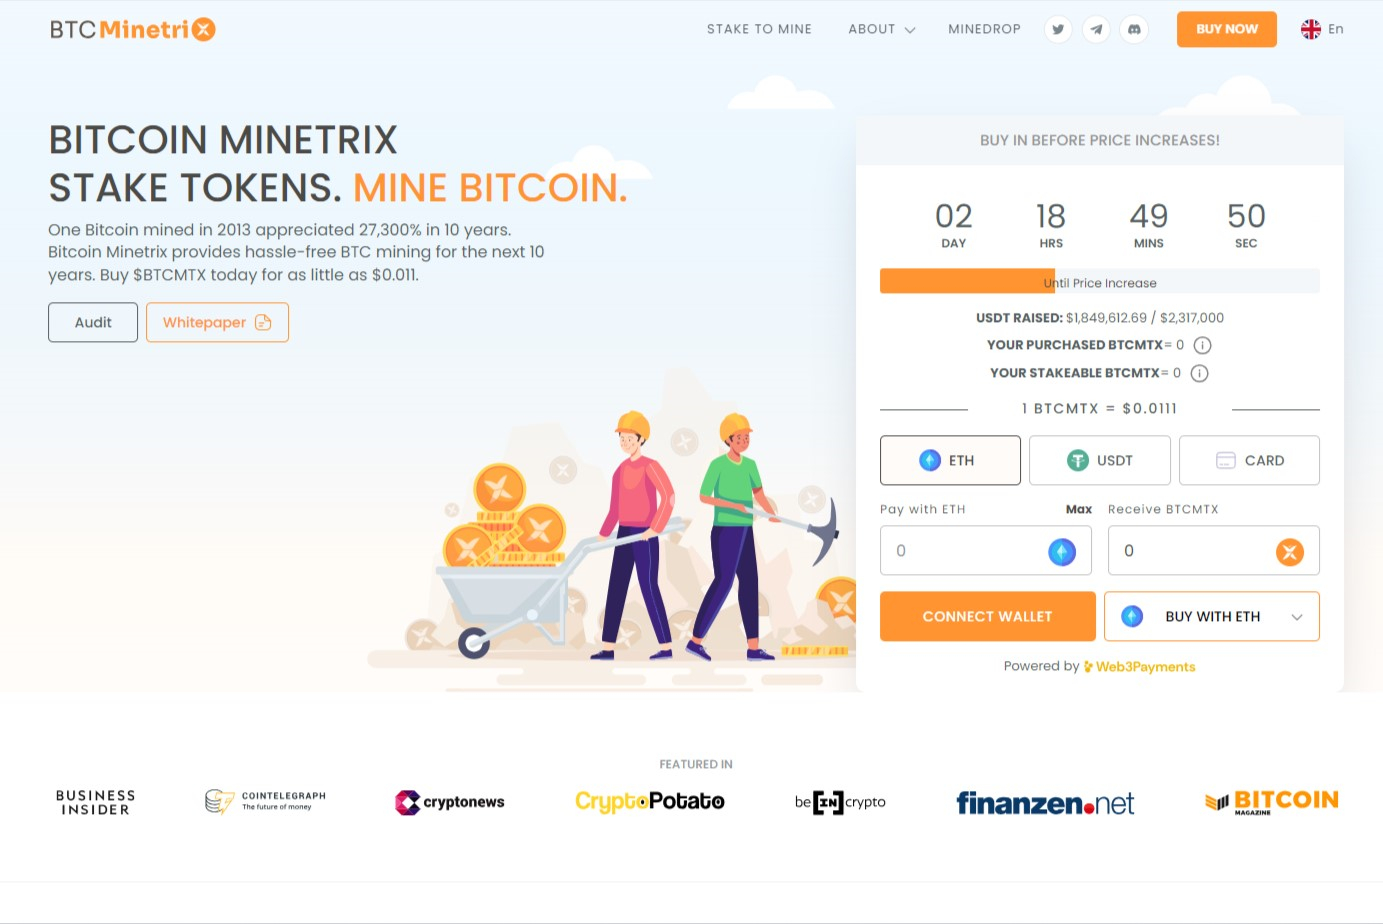 Last Chance Alert! Bitcoin Minetrix Stage 2 Ends Soon - Discover Why Missing Out Could Cost You BIG In 2024 Bitcoin Bull Run